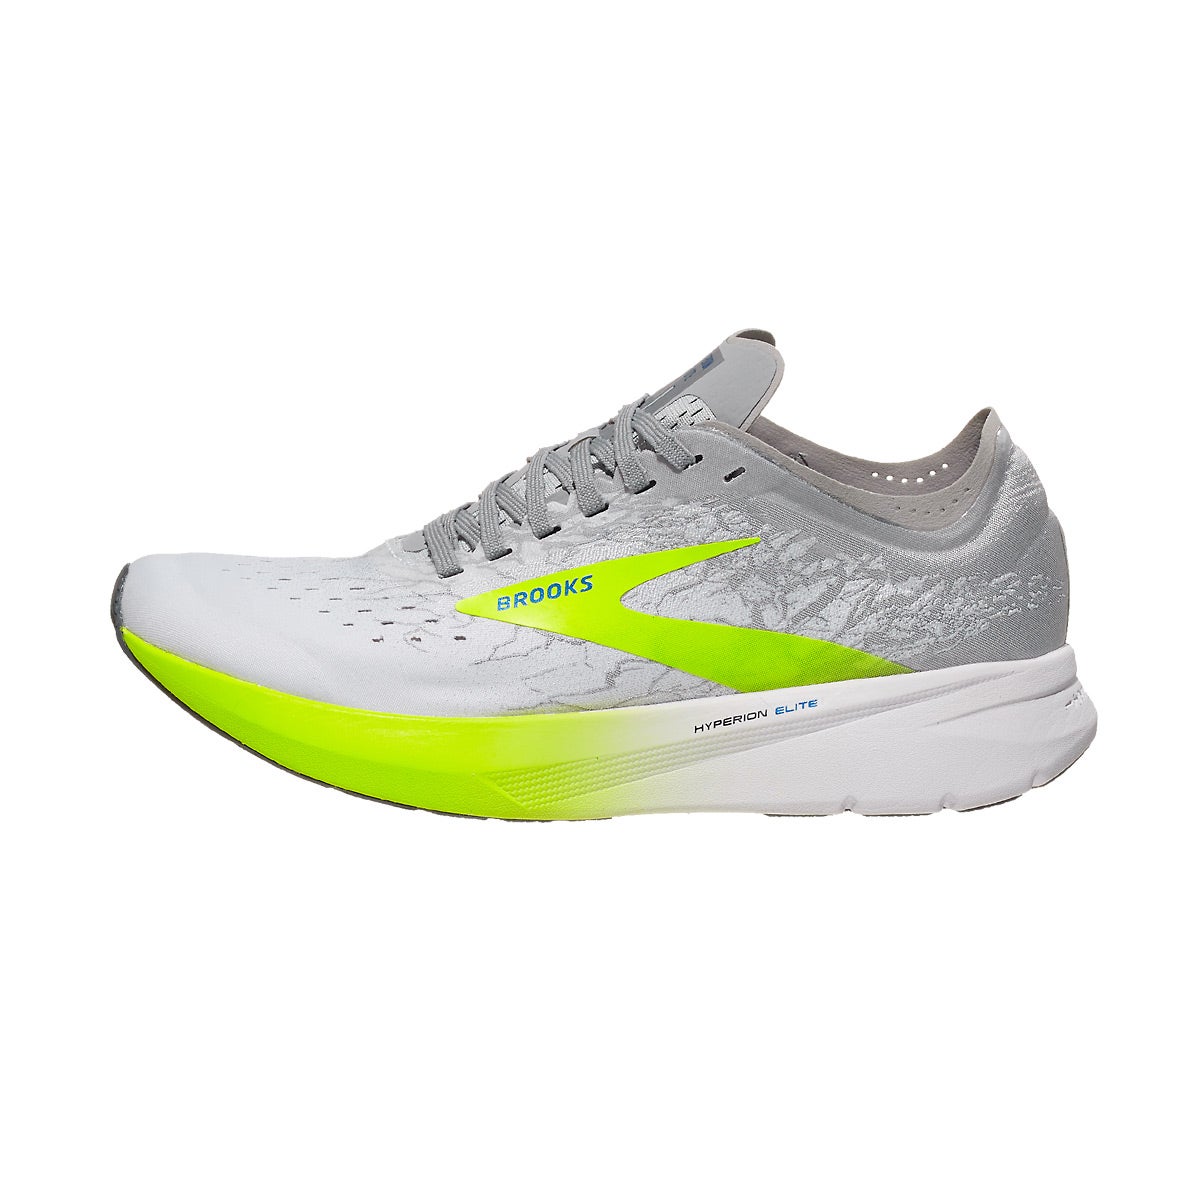 Brooks Hyperion Elite Unisex Shoes White/Nightlife/G 360° View ...